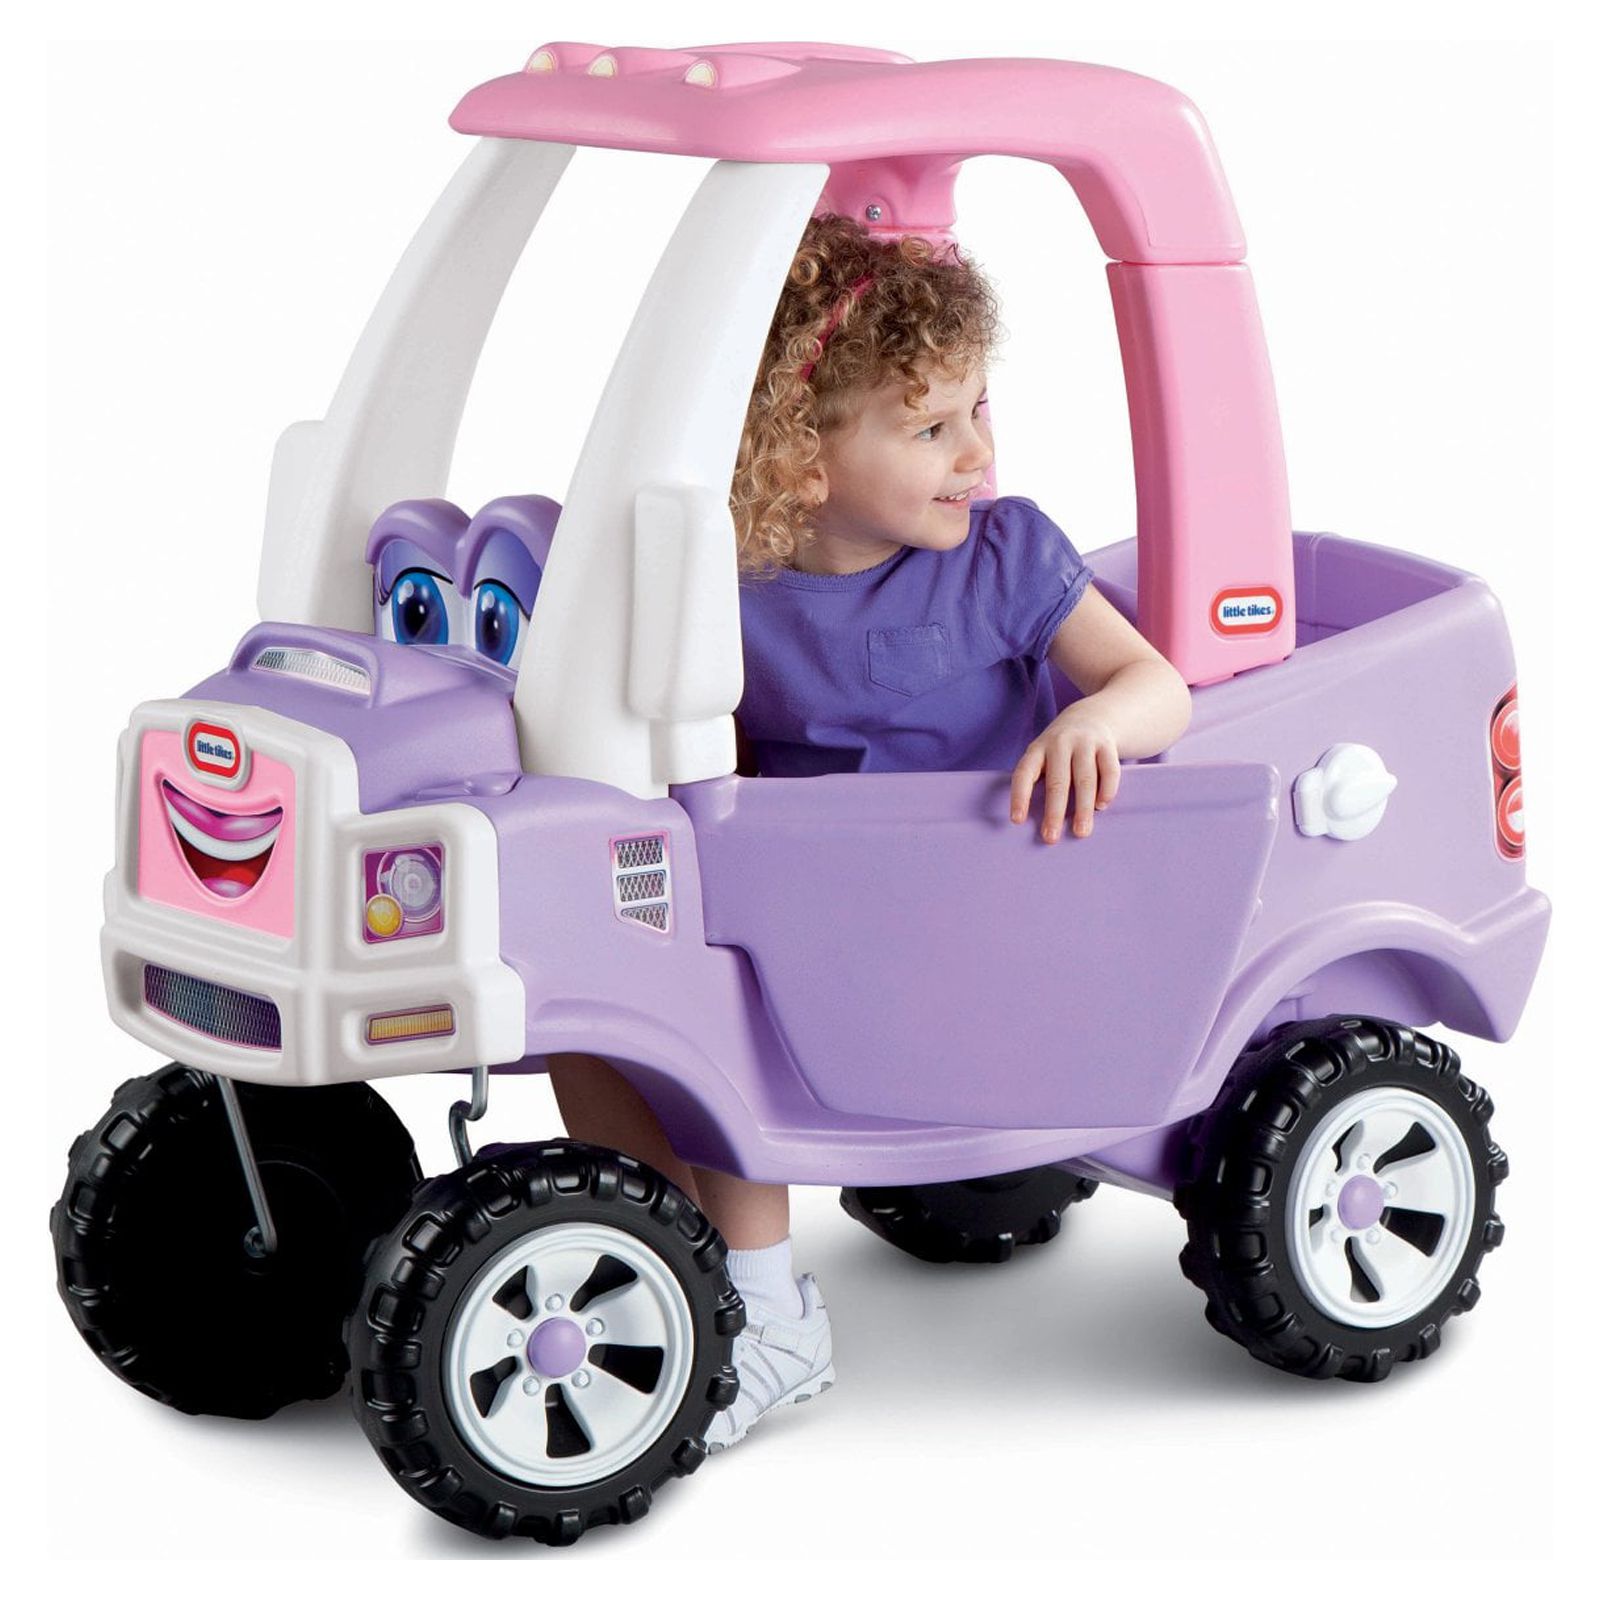 Princess Cozy Truck Little Tikes - image 1 of 8